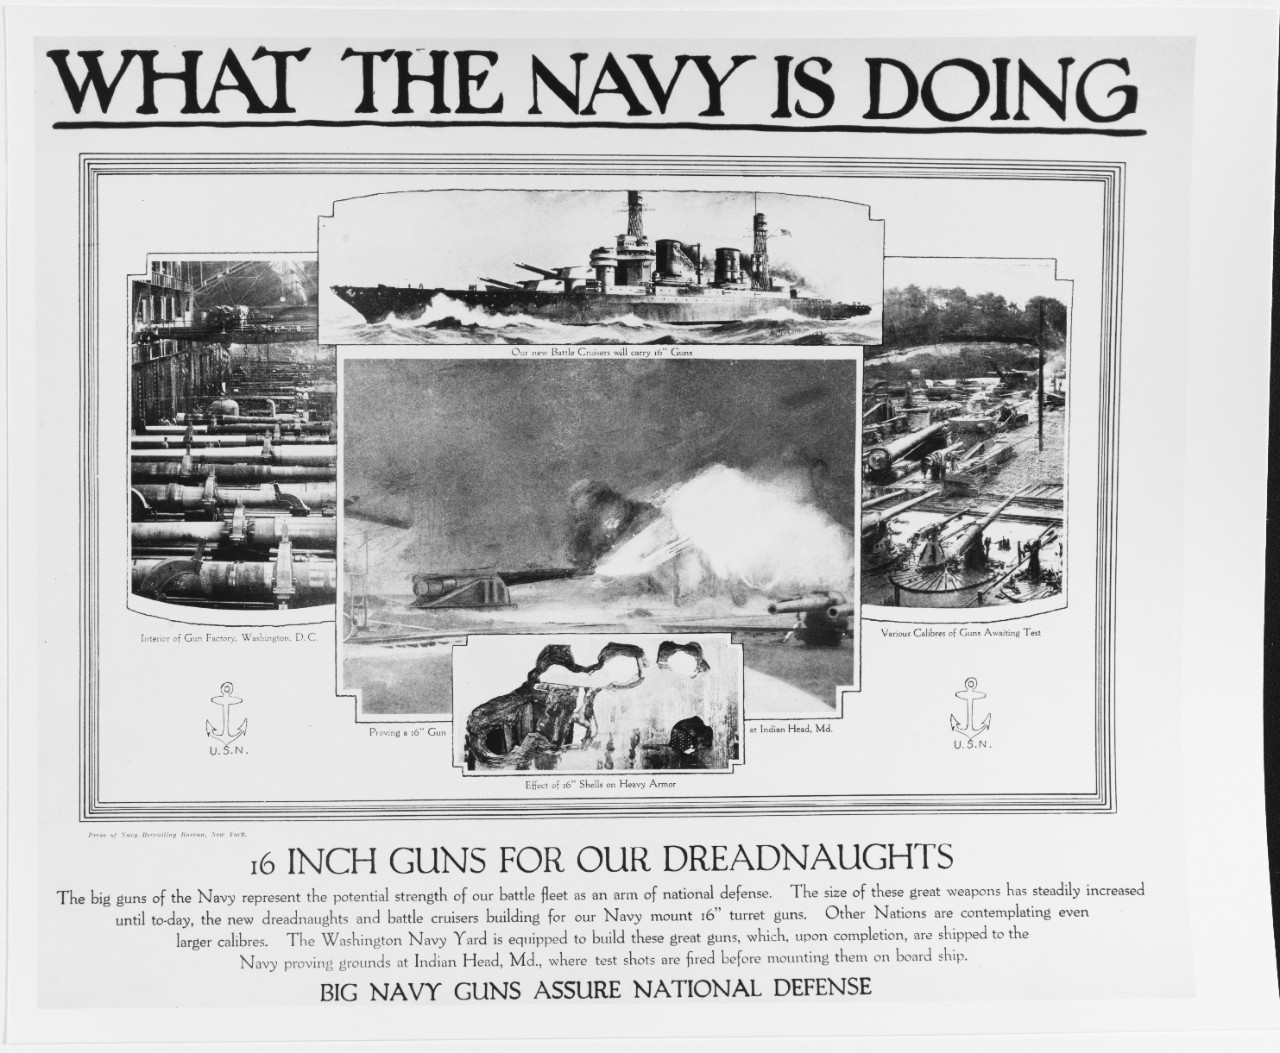 Recruiting Poster: What the Navy is Doing: 16" Guns for our Dreadnaughts